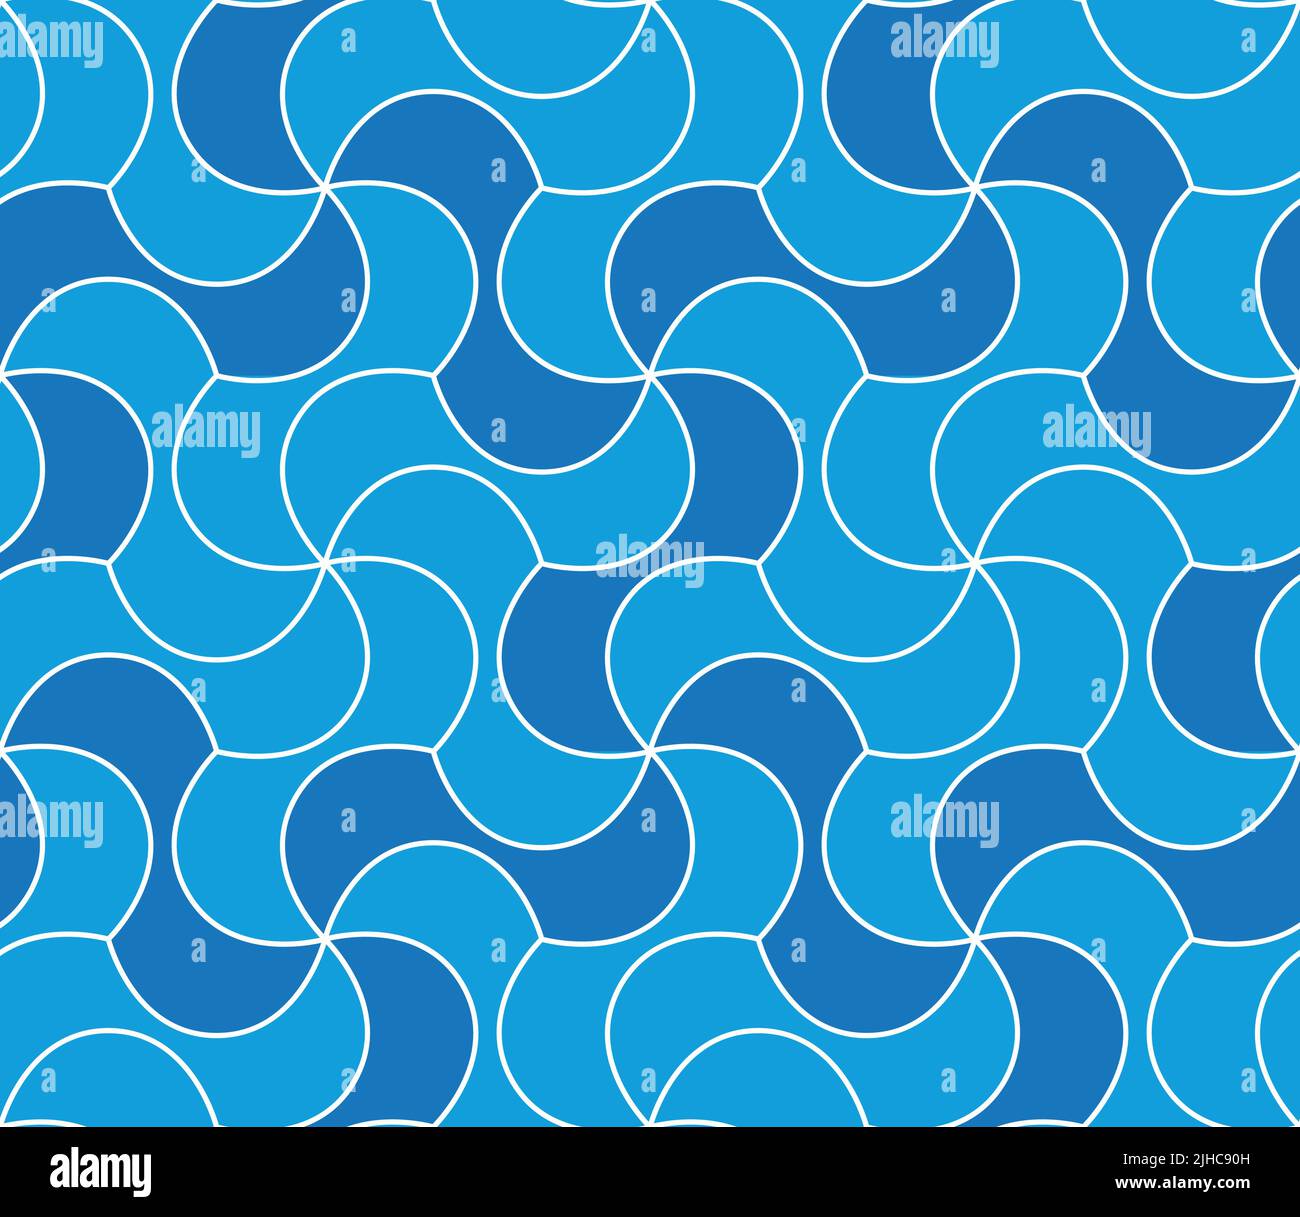 Geometric seamless pattern. Abstract design textile print. Vector illustration. Stock Vector